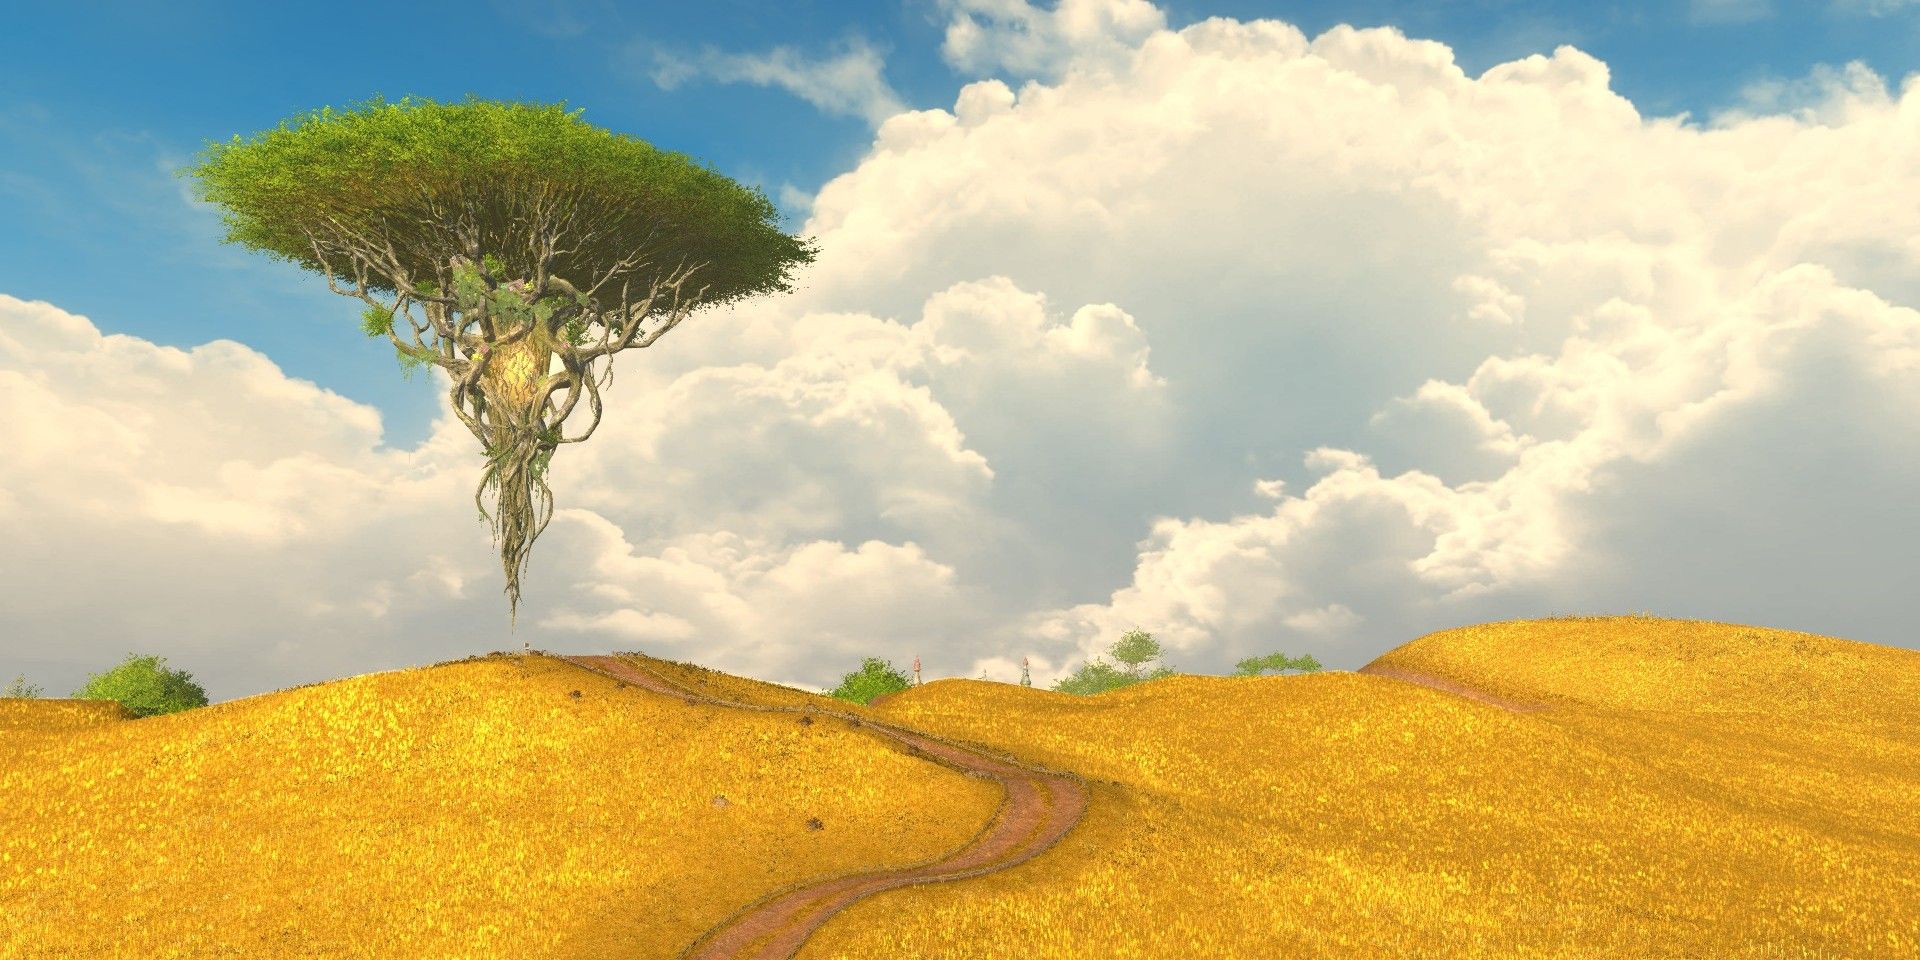 Final Fantasy XIV's Euphrosyne Raid initial setting. It is a golden field with a blue sky and large clouds and, closer in the distance is a floating tree.